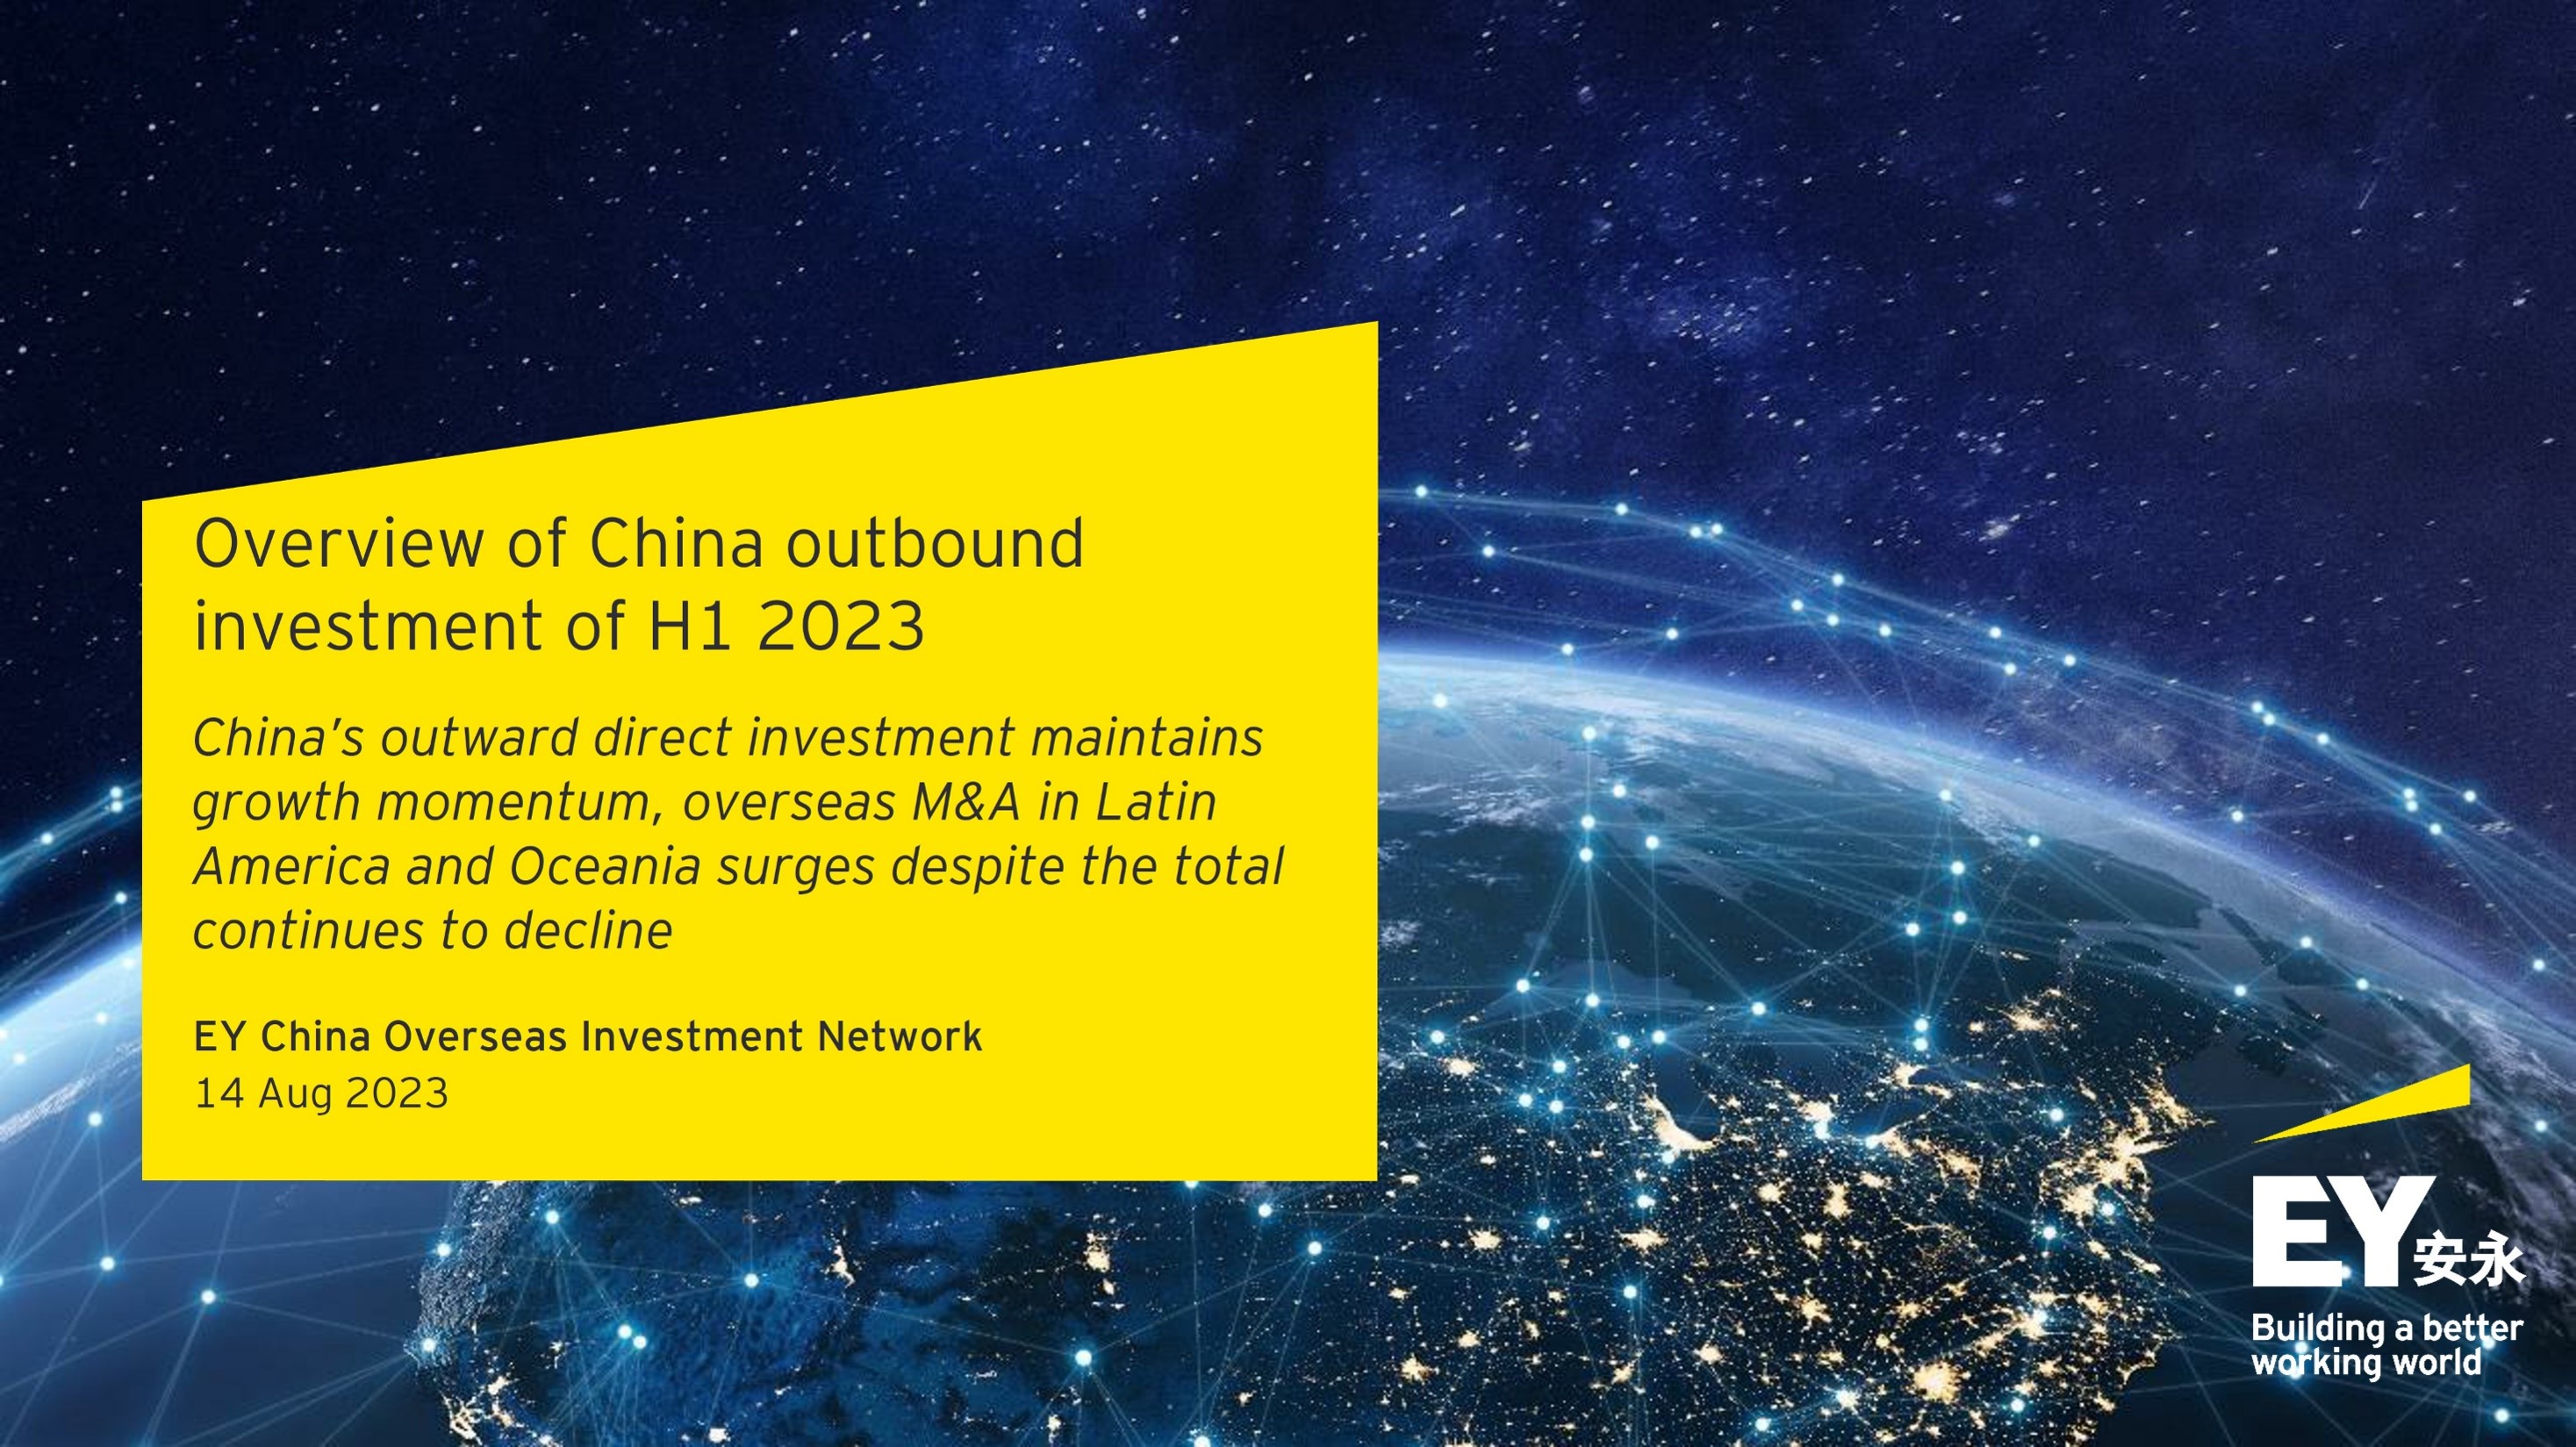 Overview of China outbound investment of H1 2023